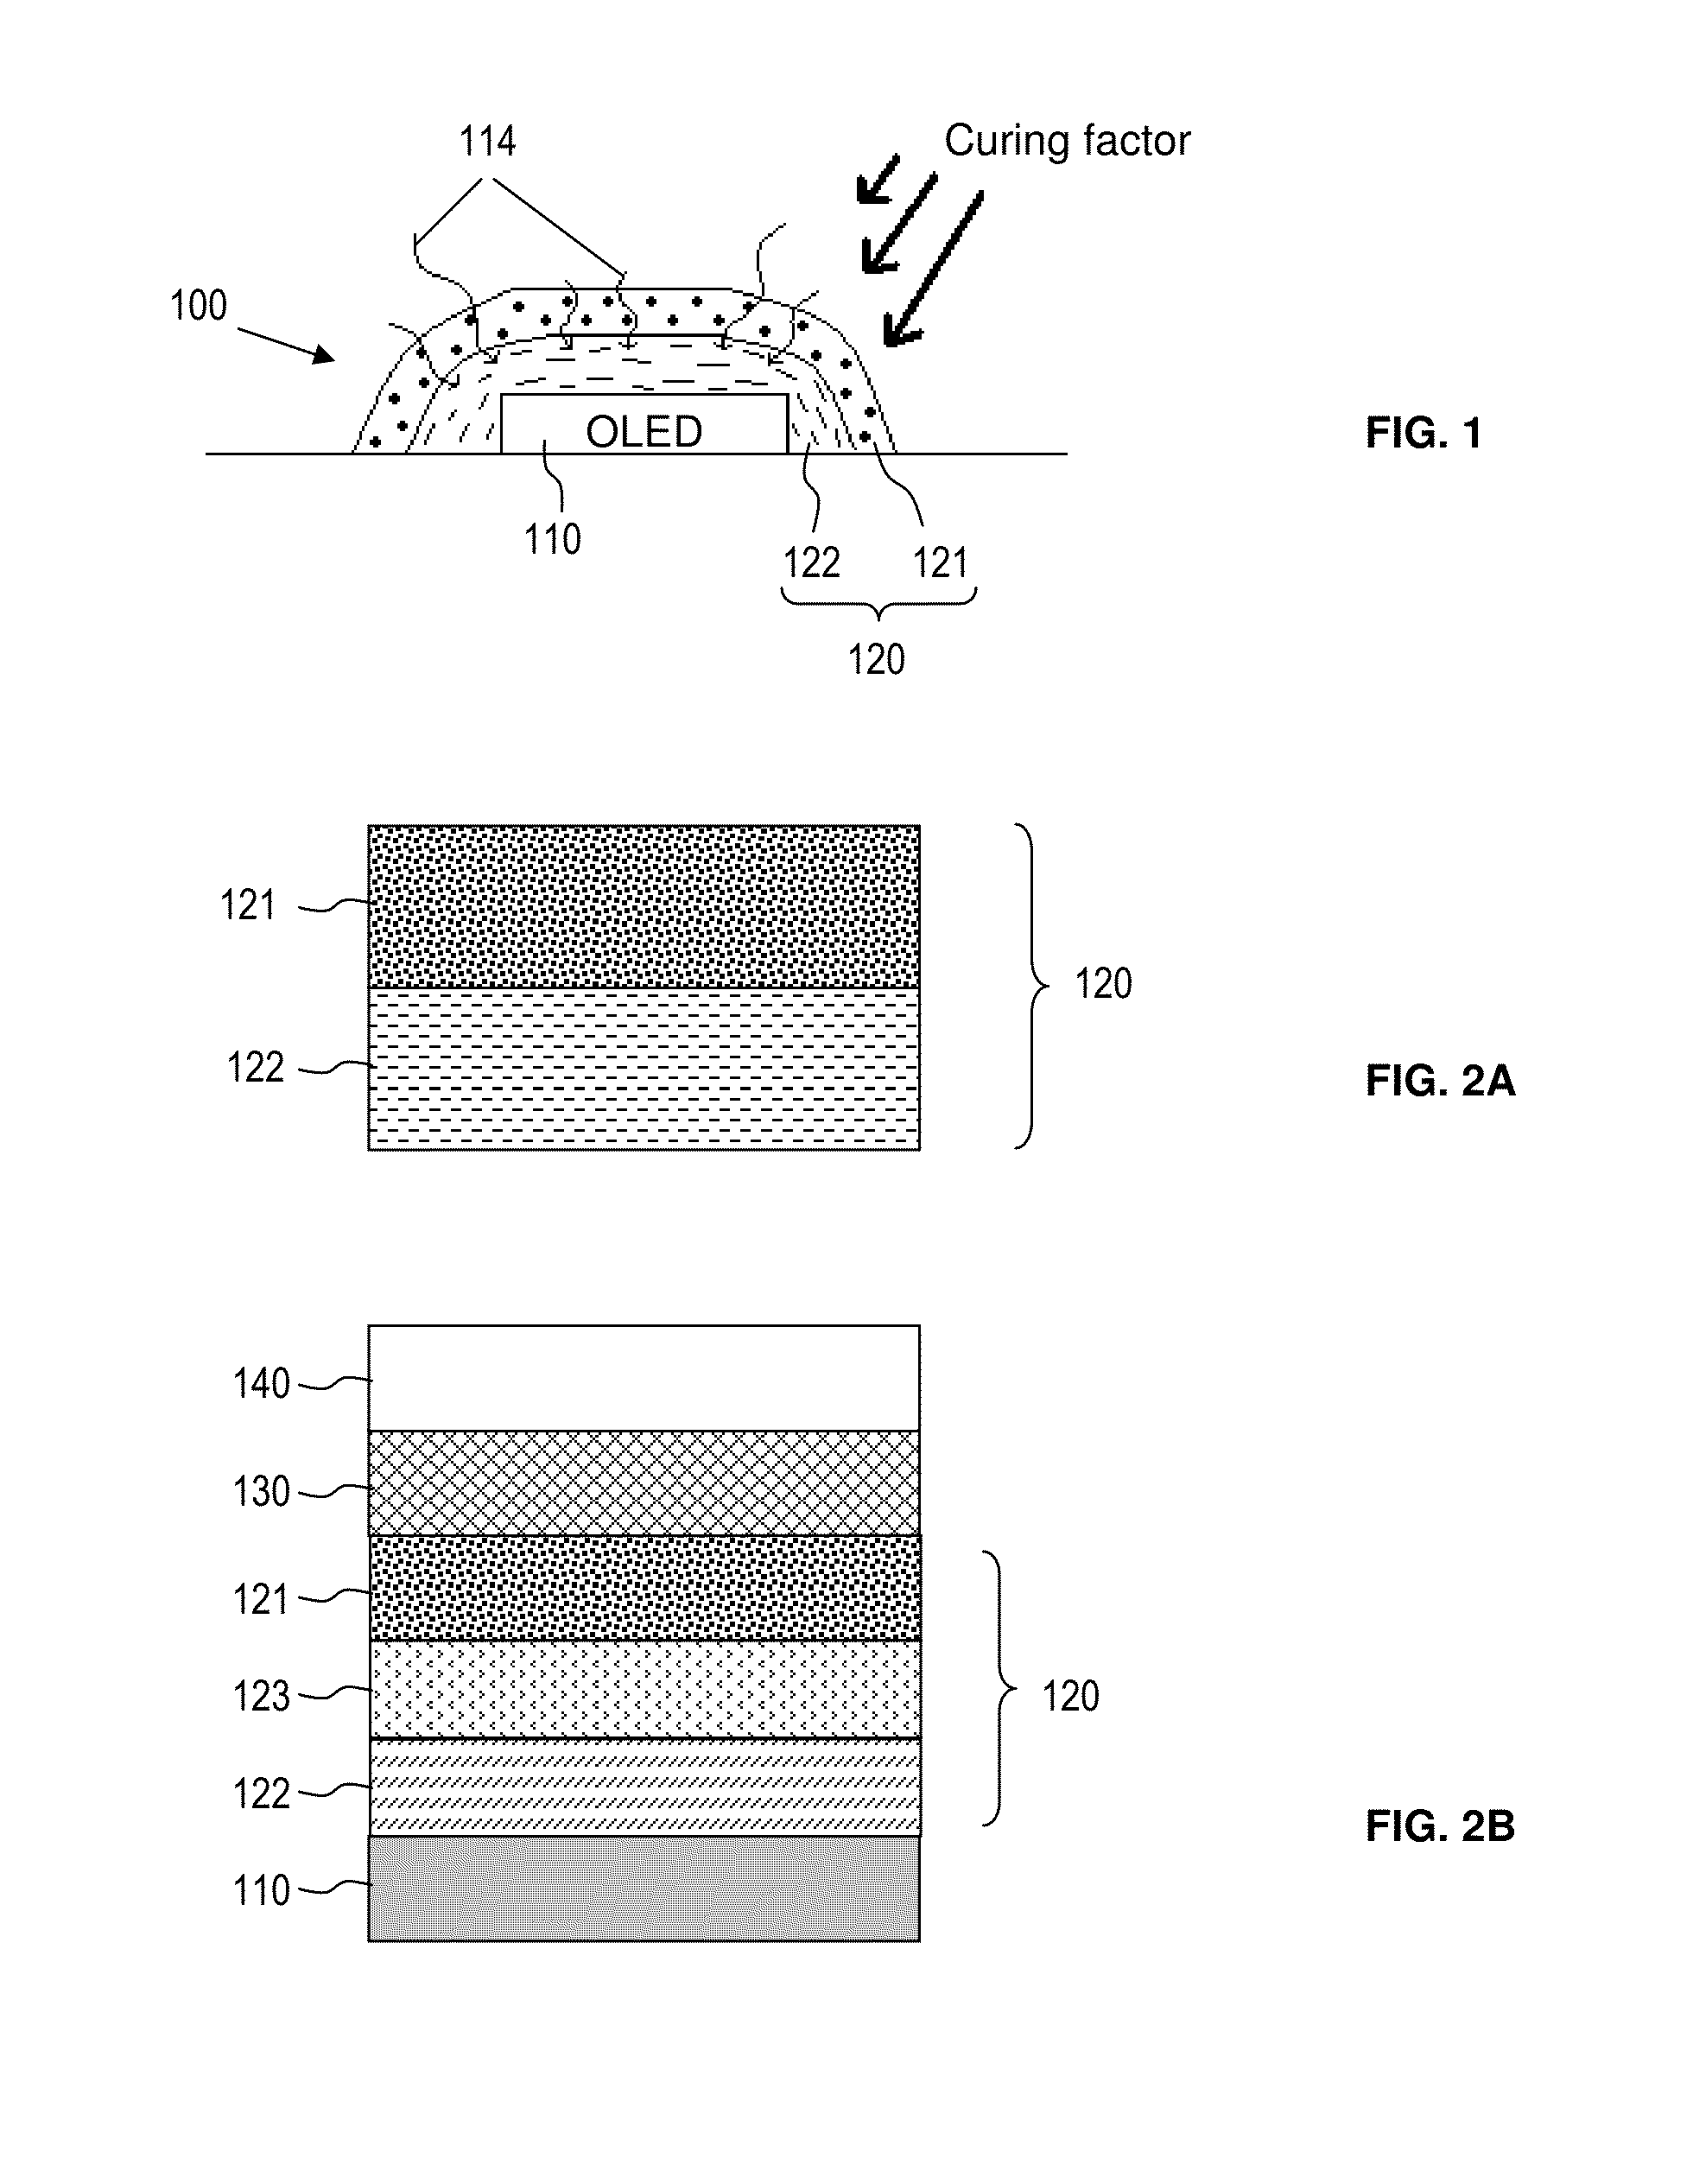 Multilayer film for encapsulating oxygen and/or moisture sensitive electronic devices